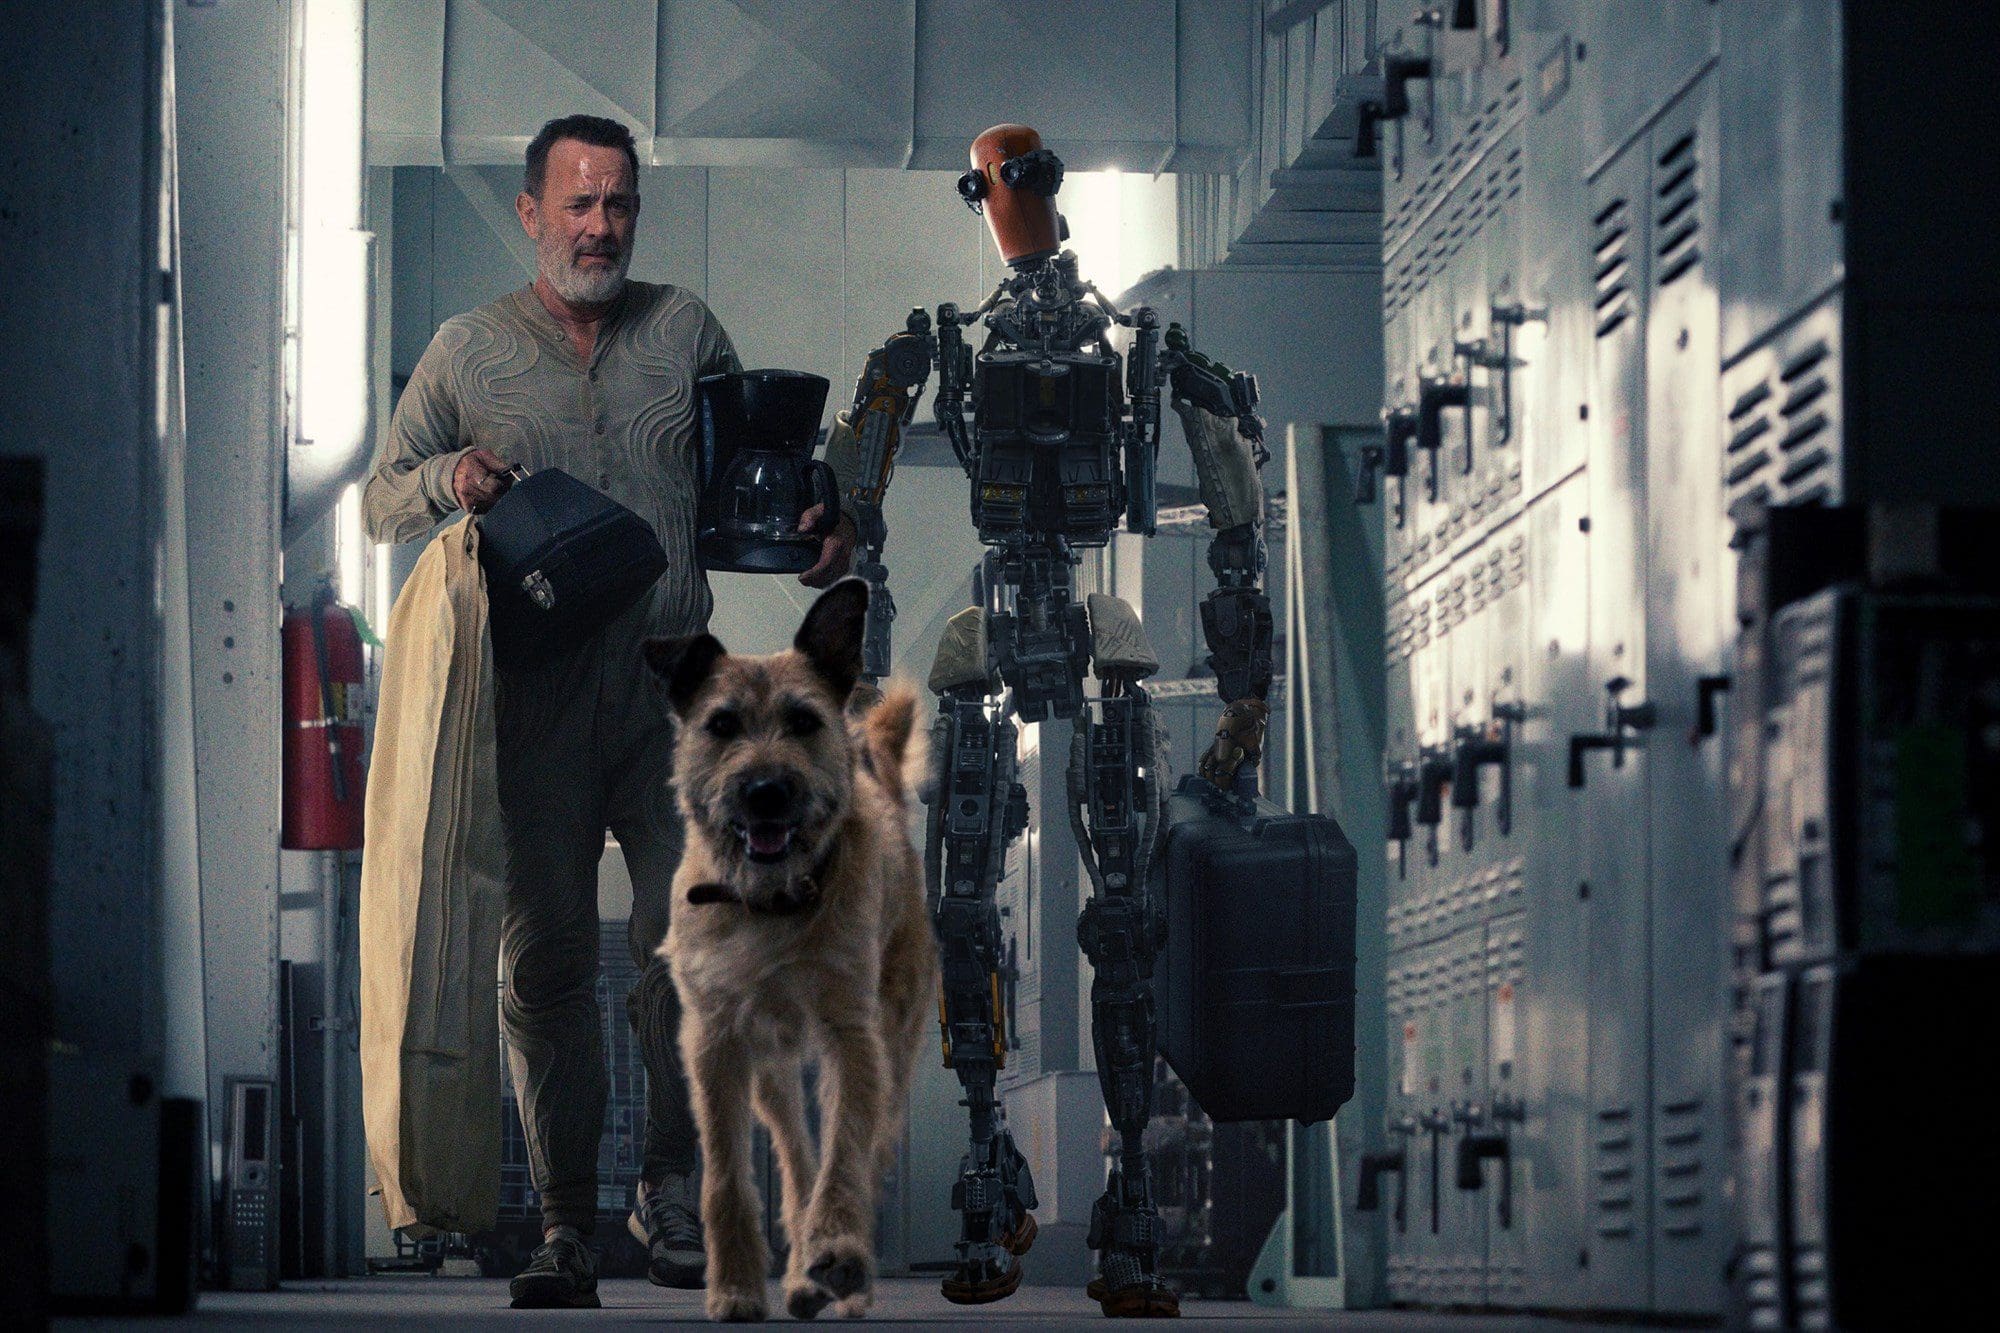 Tom Hanks and Caleb Landry Jones (as Jeff the robot) in “Finch,” now streaming on Apple TV+